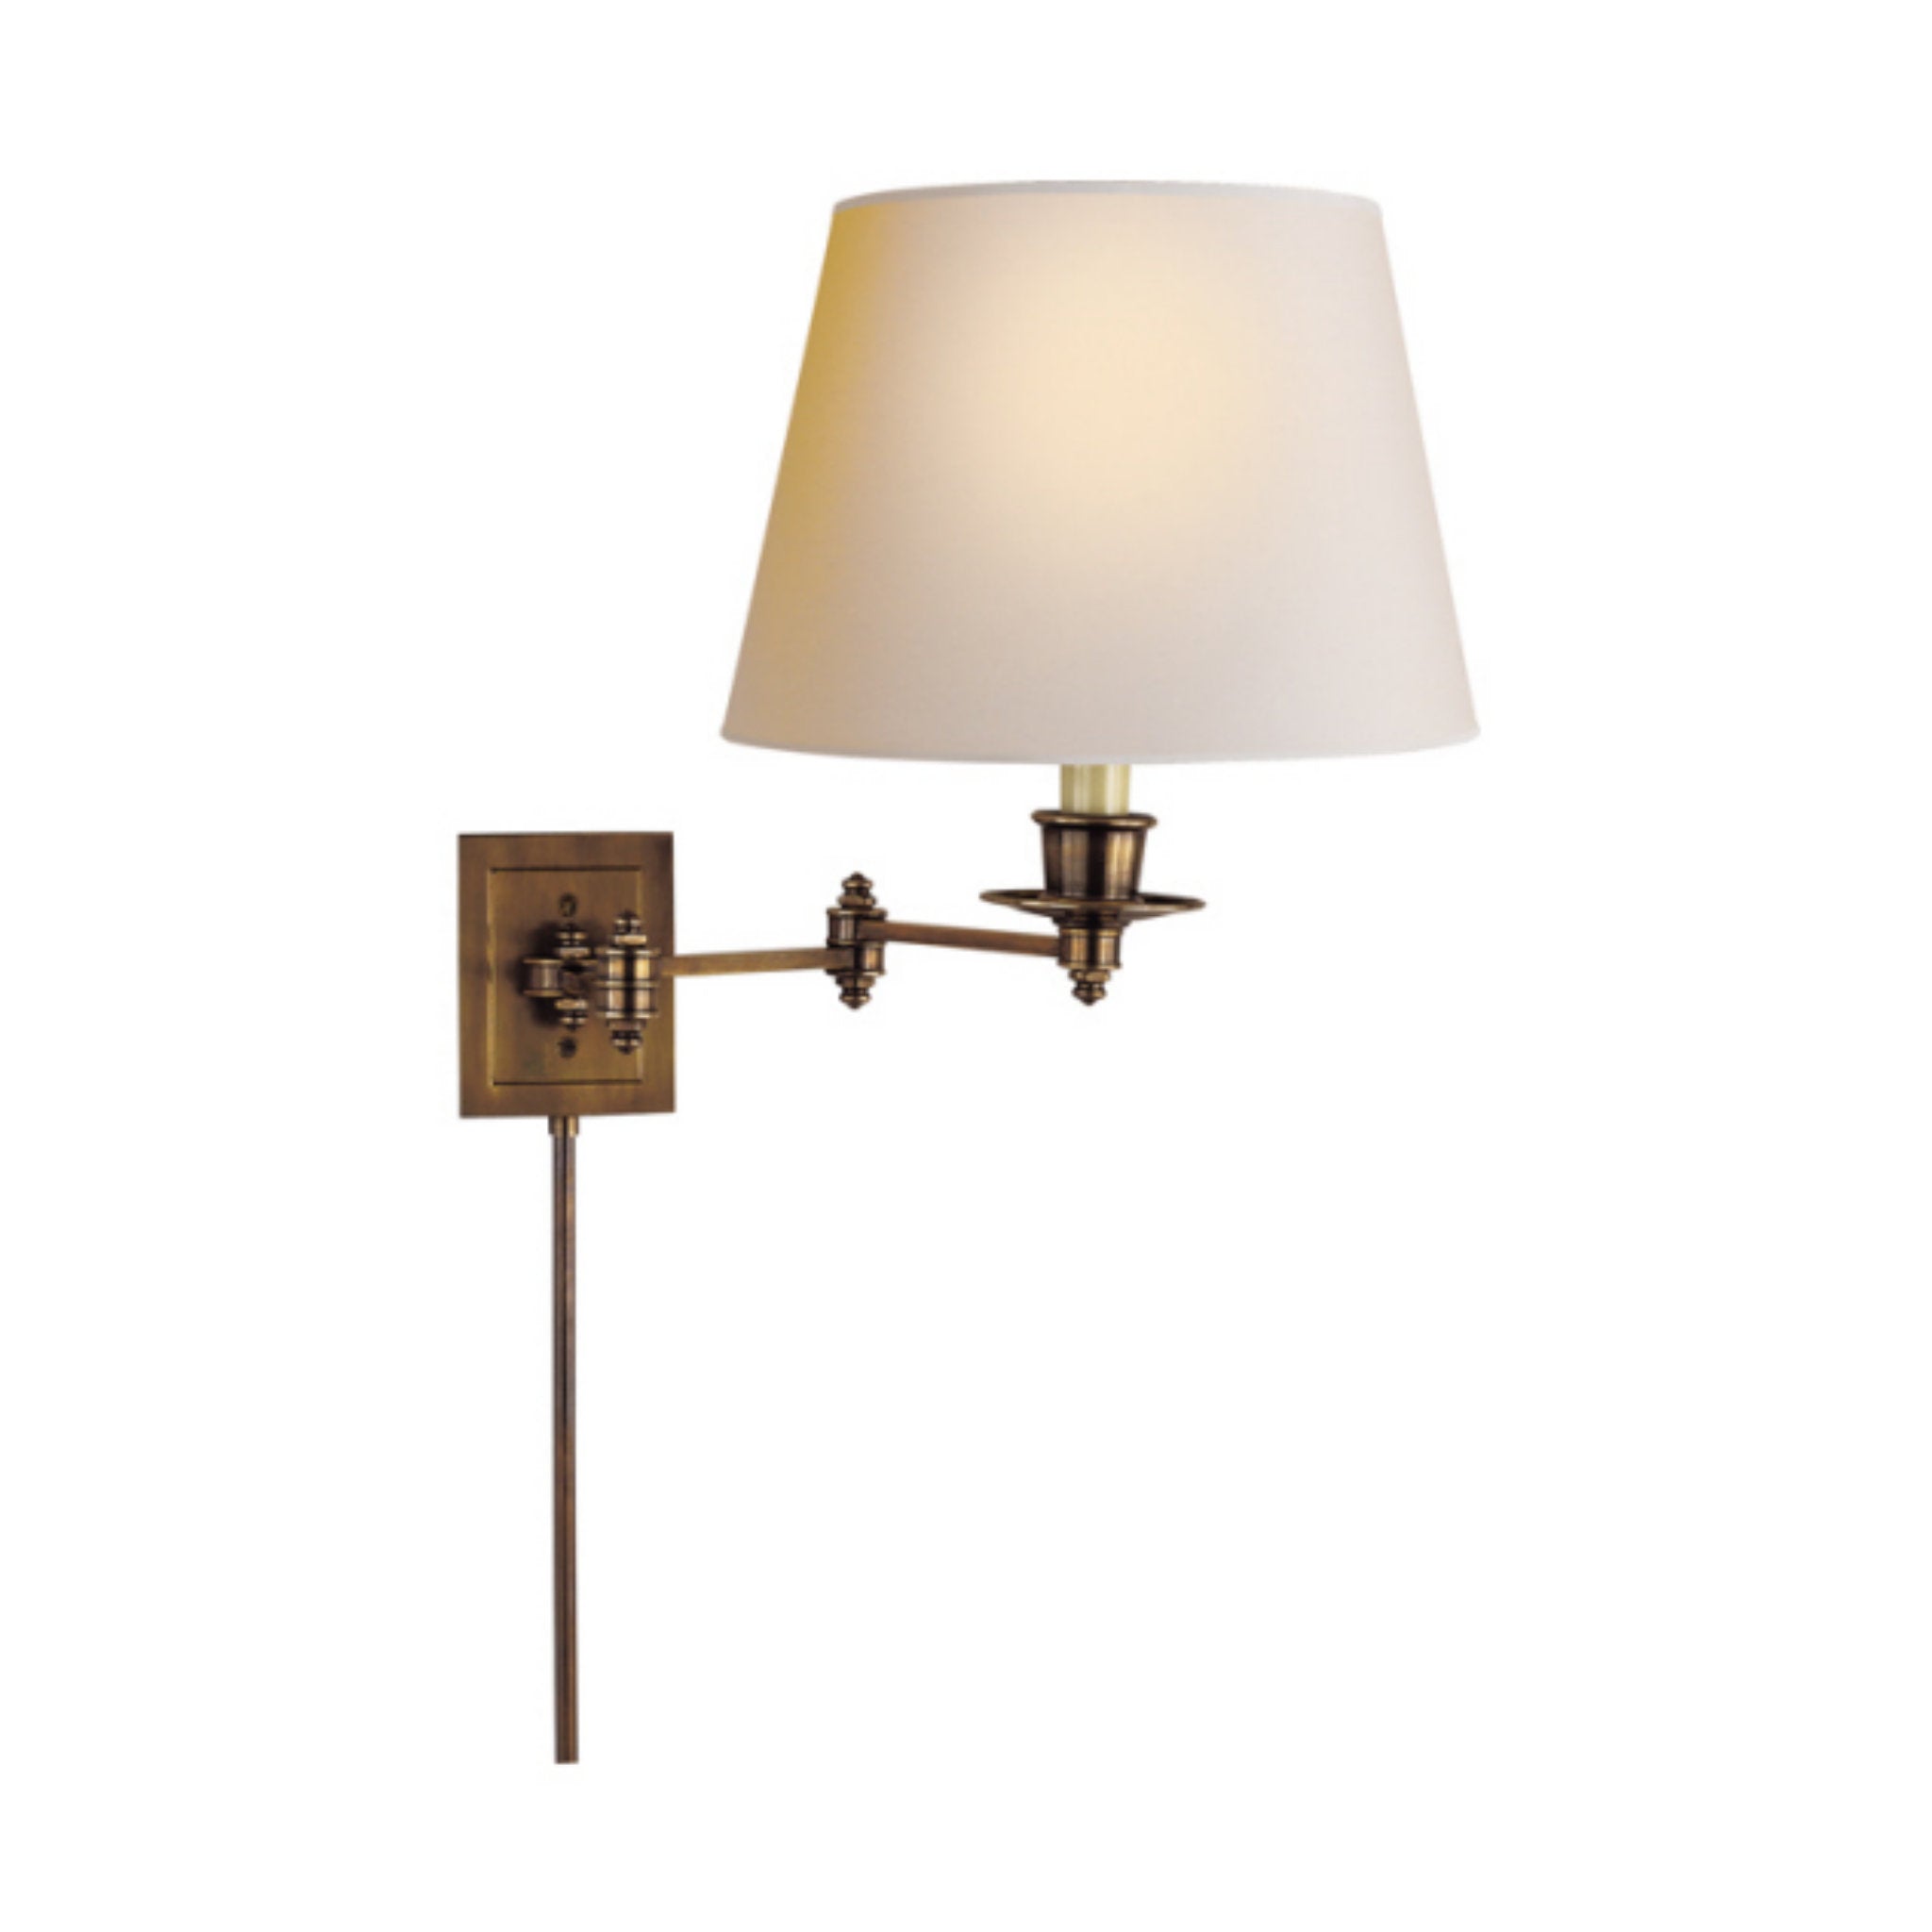 Visual Comfort Triple Swing Arm Wall Lamp in Hand-Rubbed Antique Brass with Natural Paper Shade